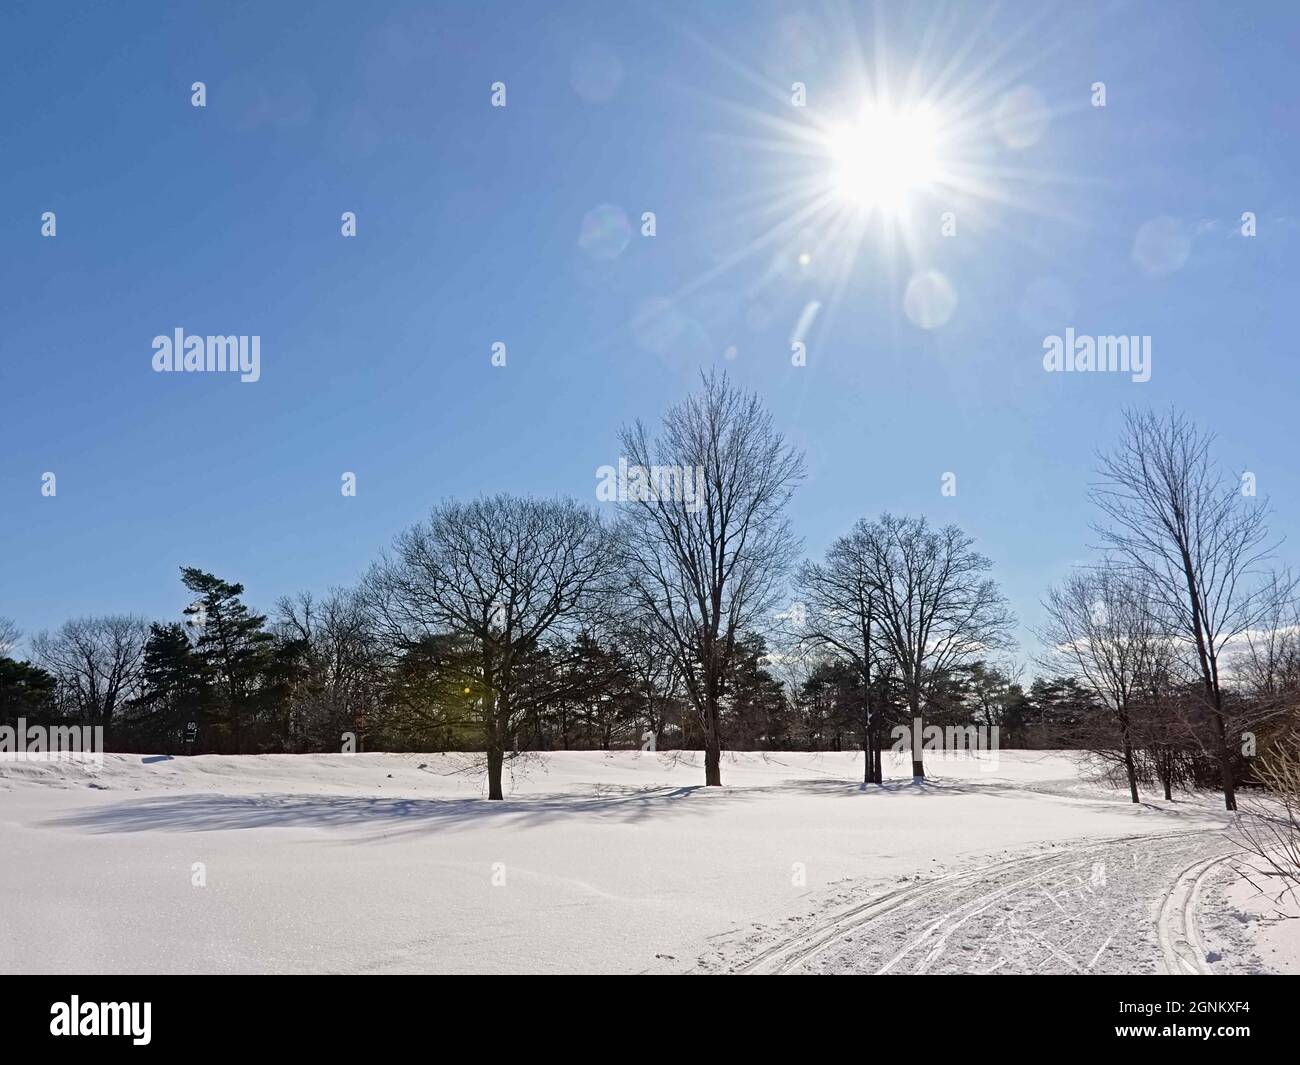 `Sjam` Cross country ski trail in the snow along bare trees and shrubs on a sunny day with the sun on a clear blue sky in Ottawa, Canada Stock Photo